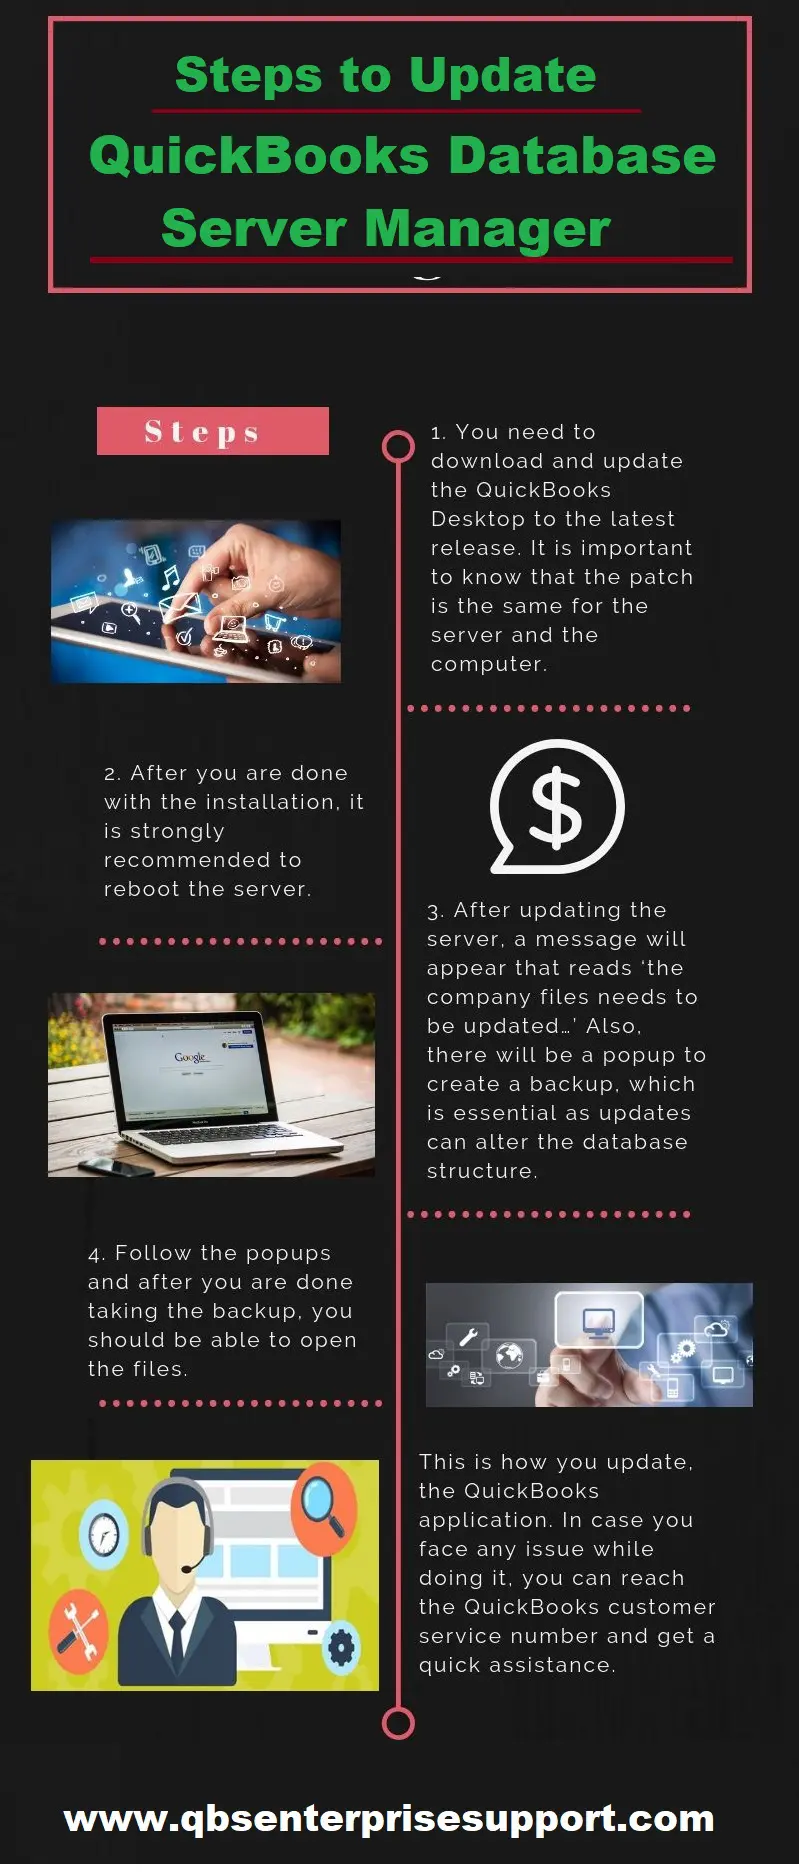 Steps to Update QuickBooks Database Server Manager - Infographic Image